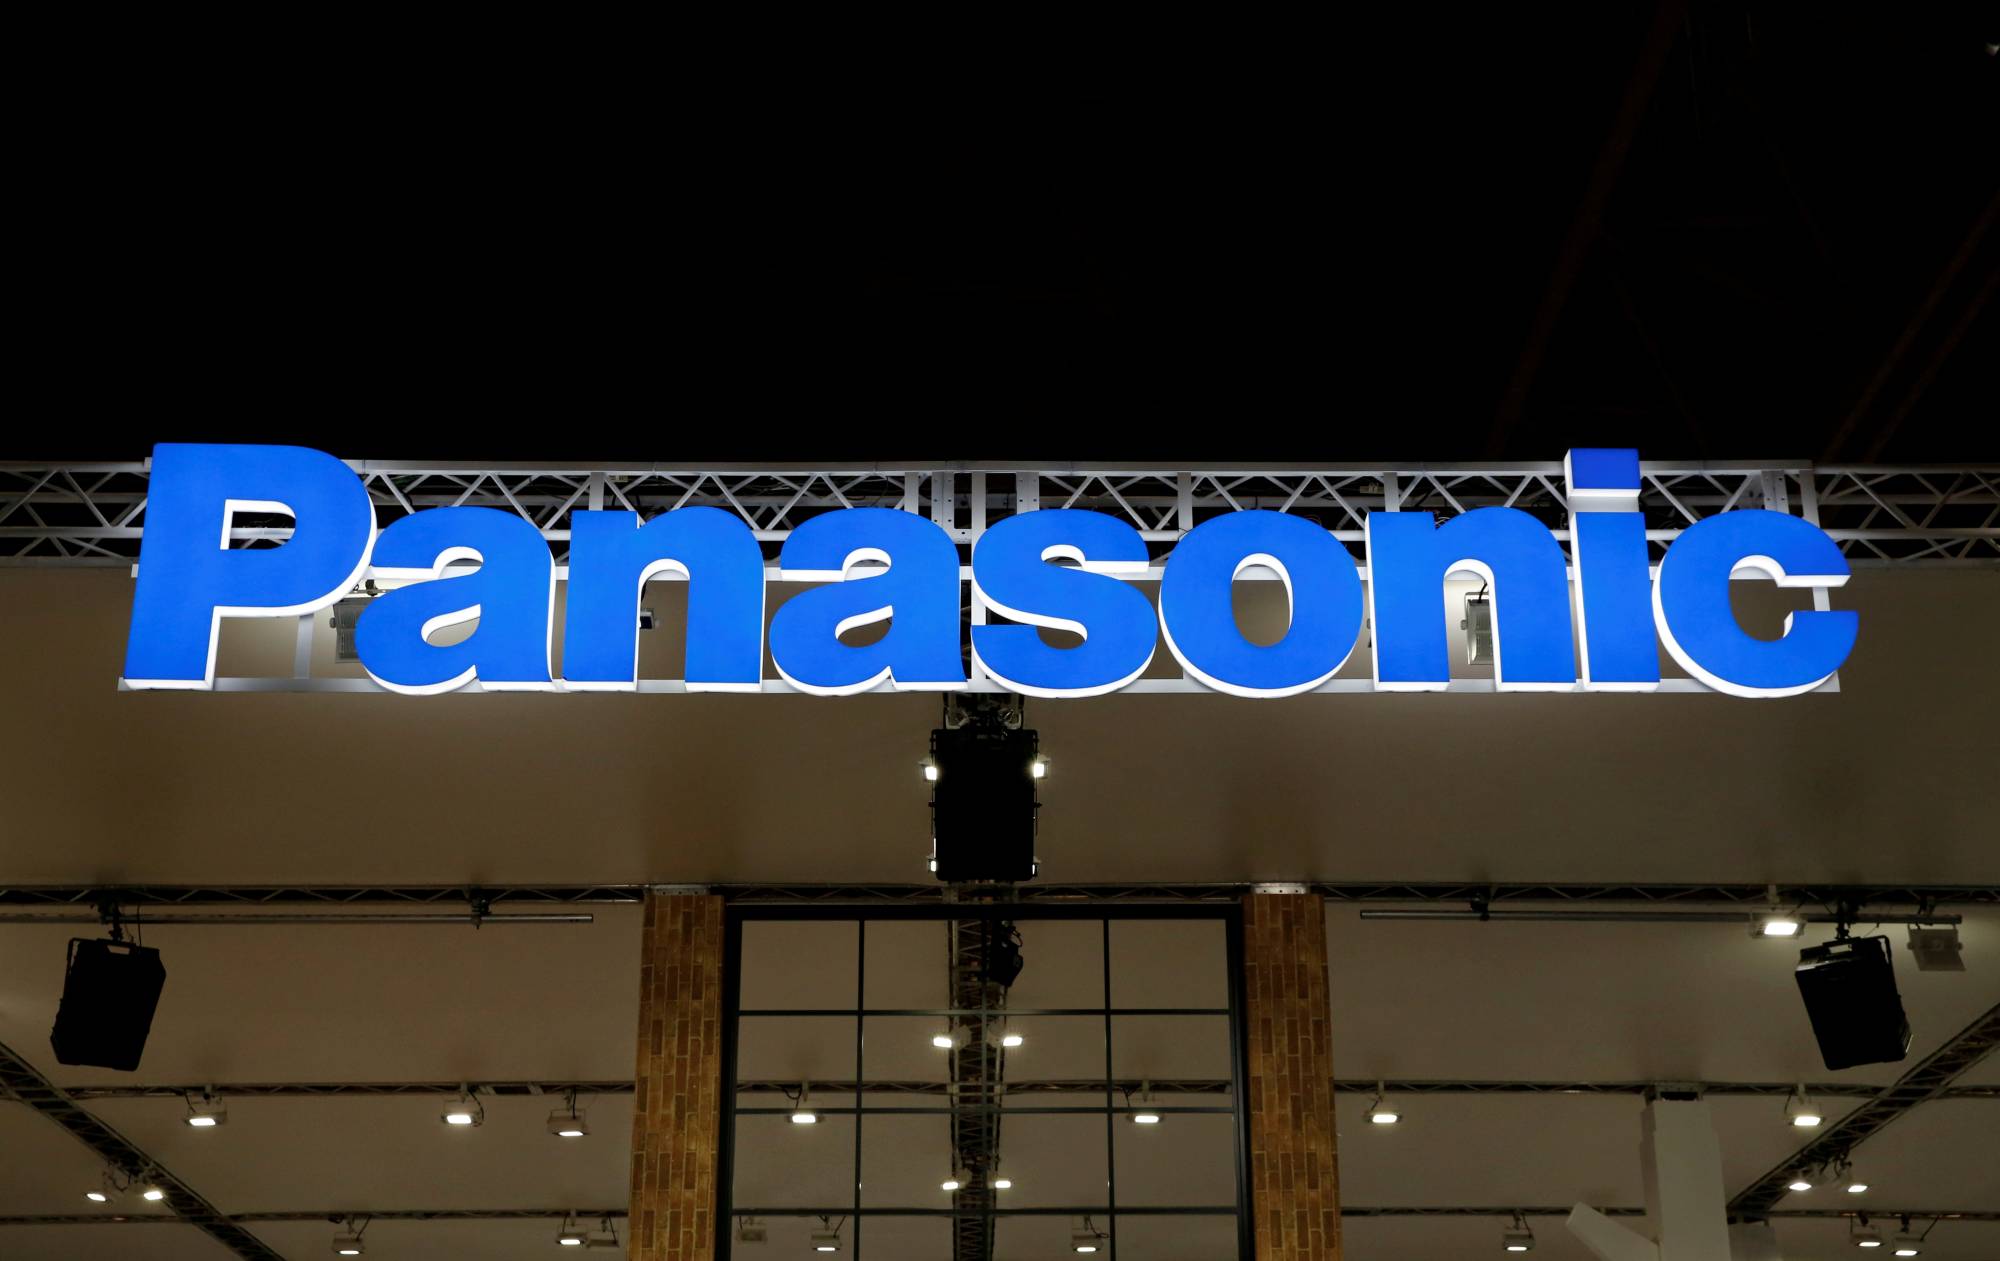 Panasonic will invest more than ¥50 billion in China to build and expand factories, the Nikkei newspaper reported Friday | REUTERS